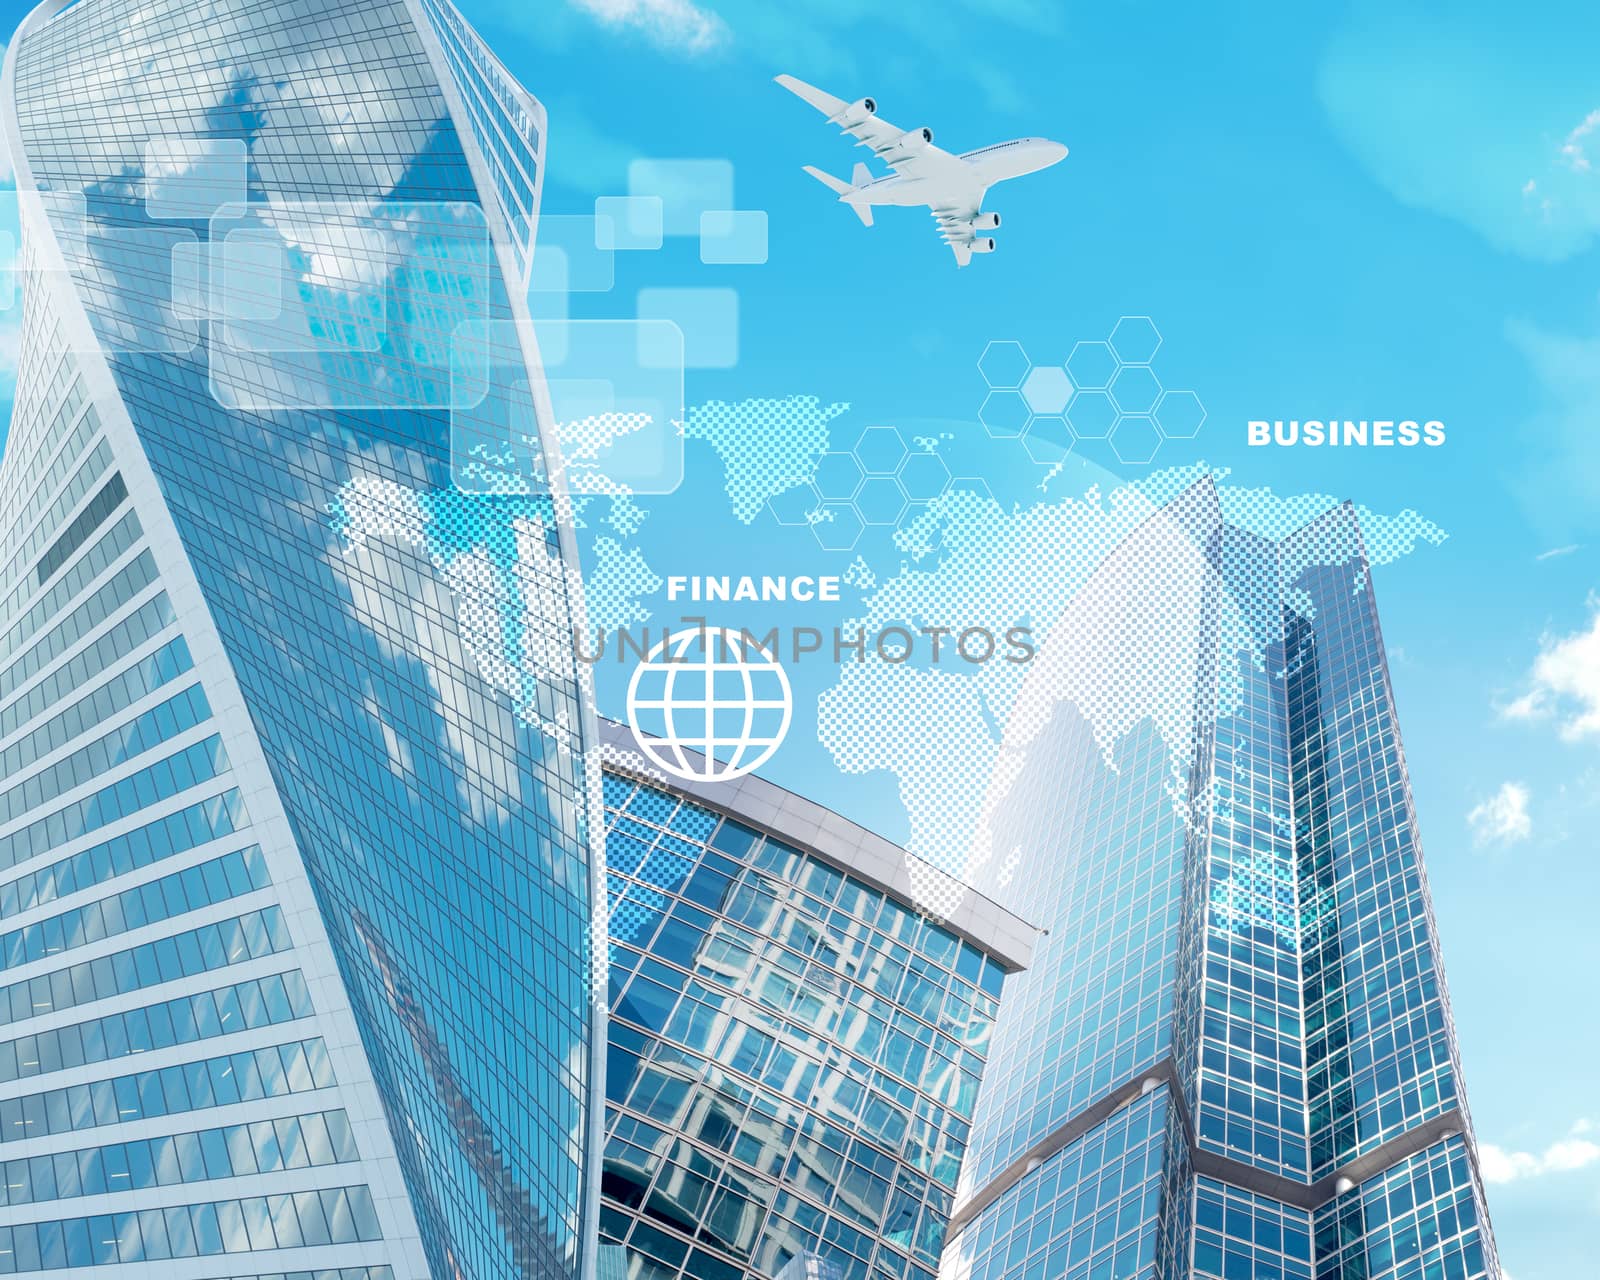 Buildings with world map and jet on blue sky background